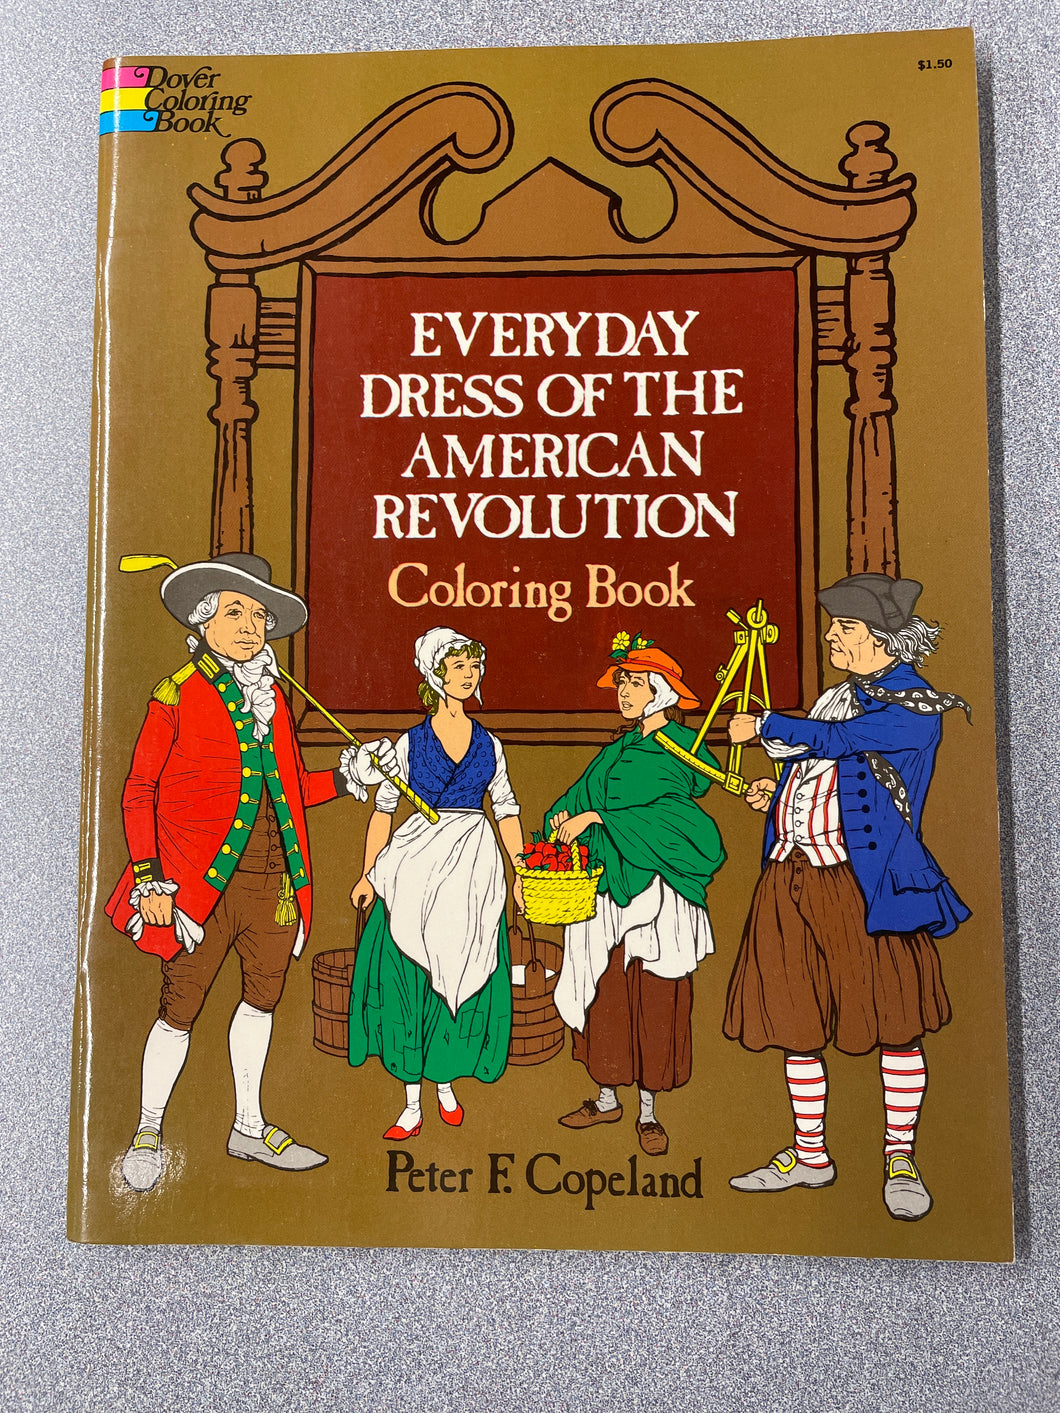 Everyday Dress of the American Revolution Coloring Book, Copeland, Peter F. [1975] CN 2/24